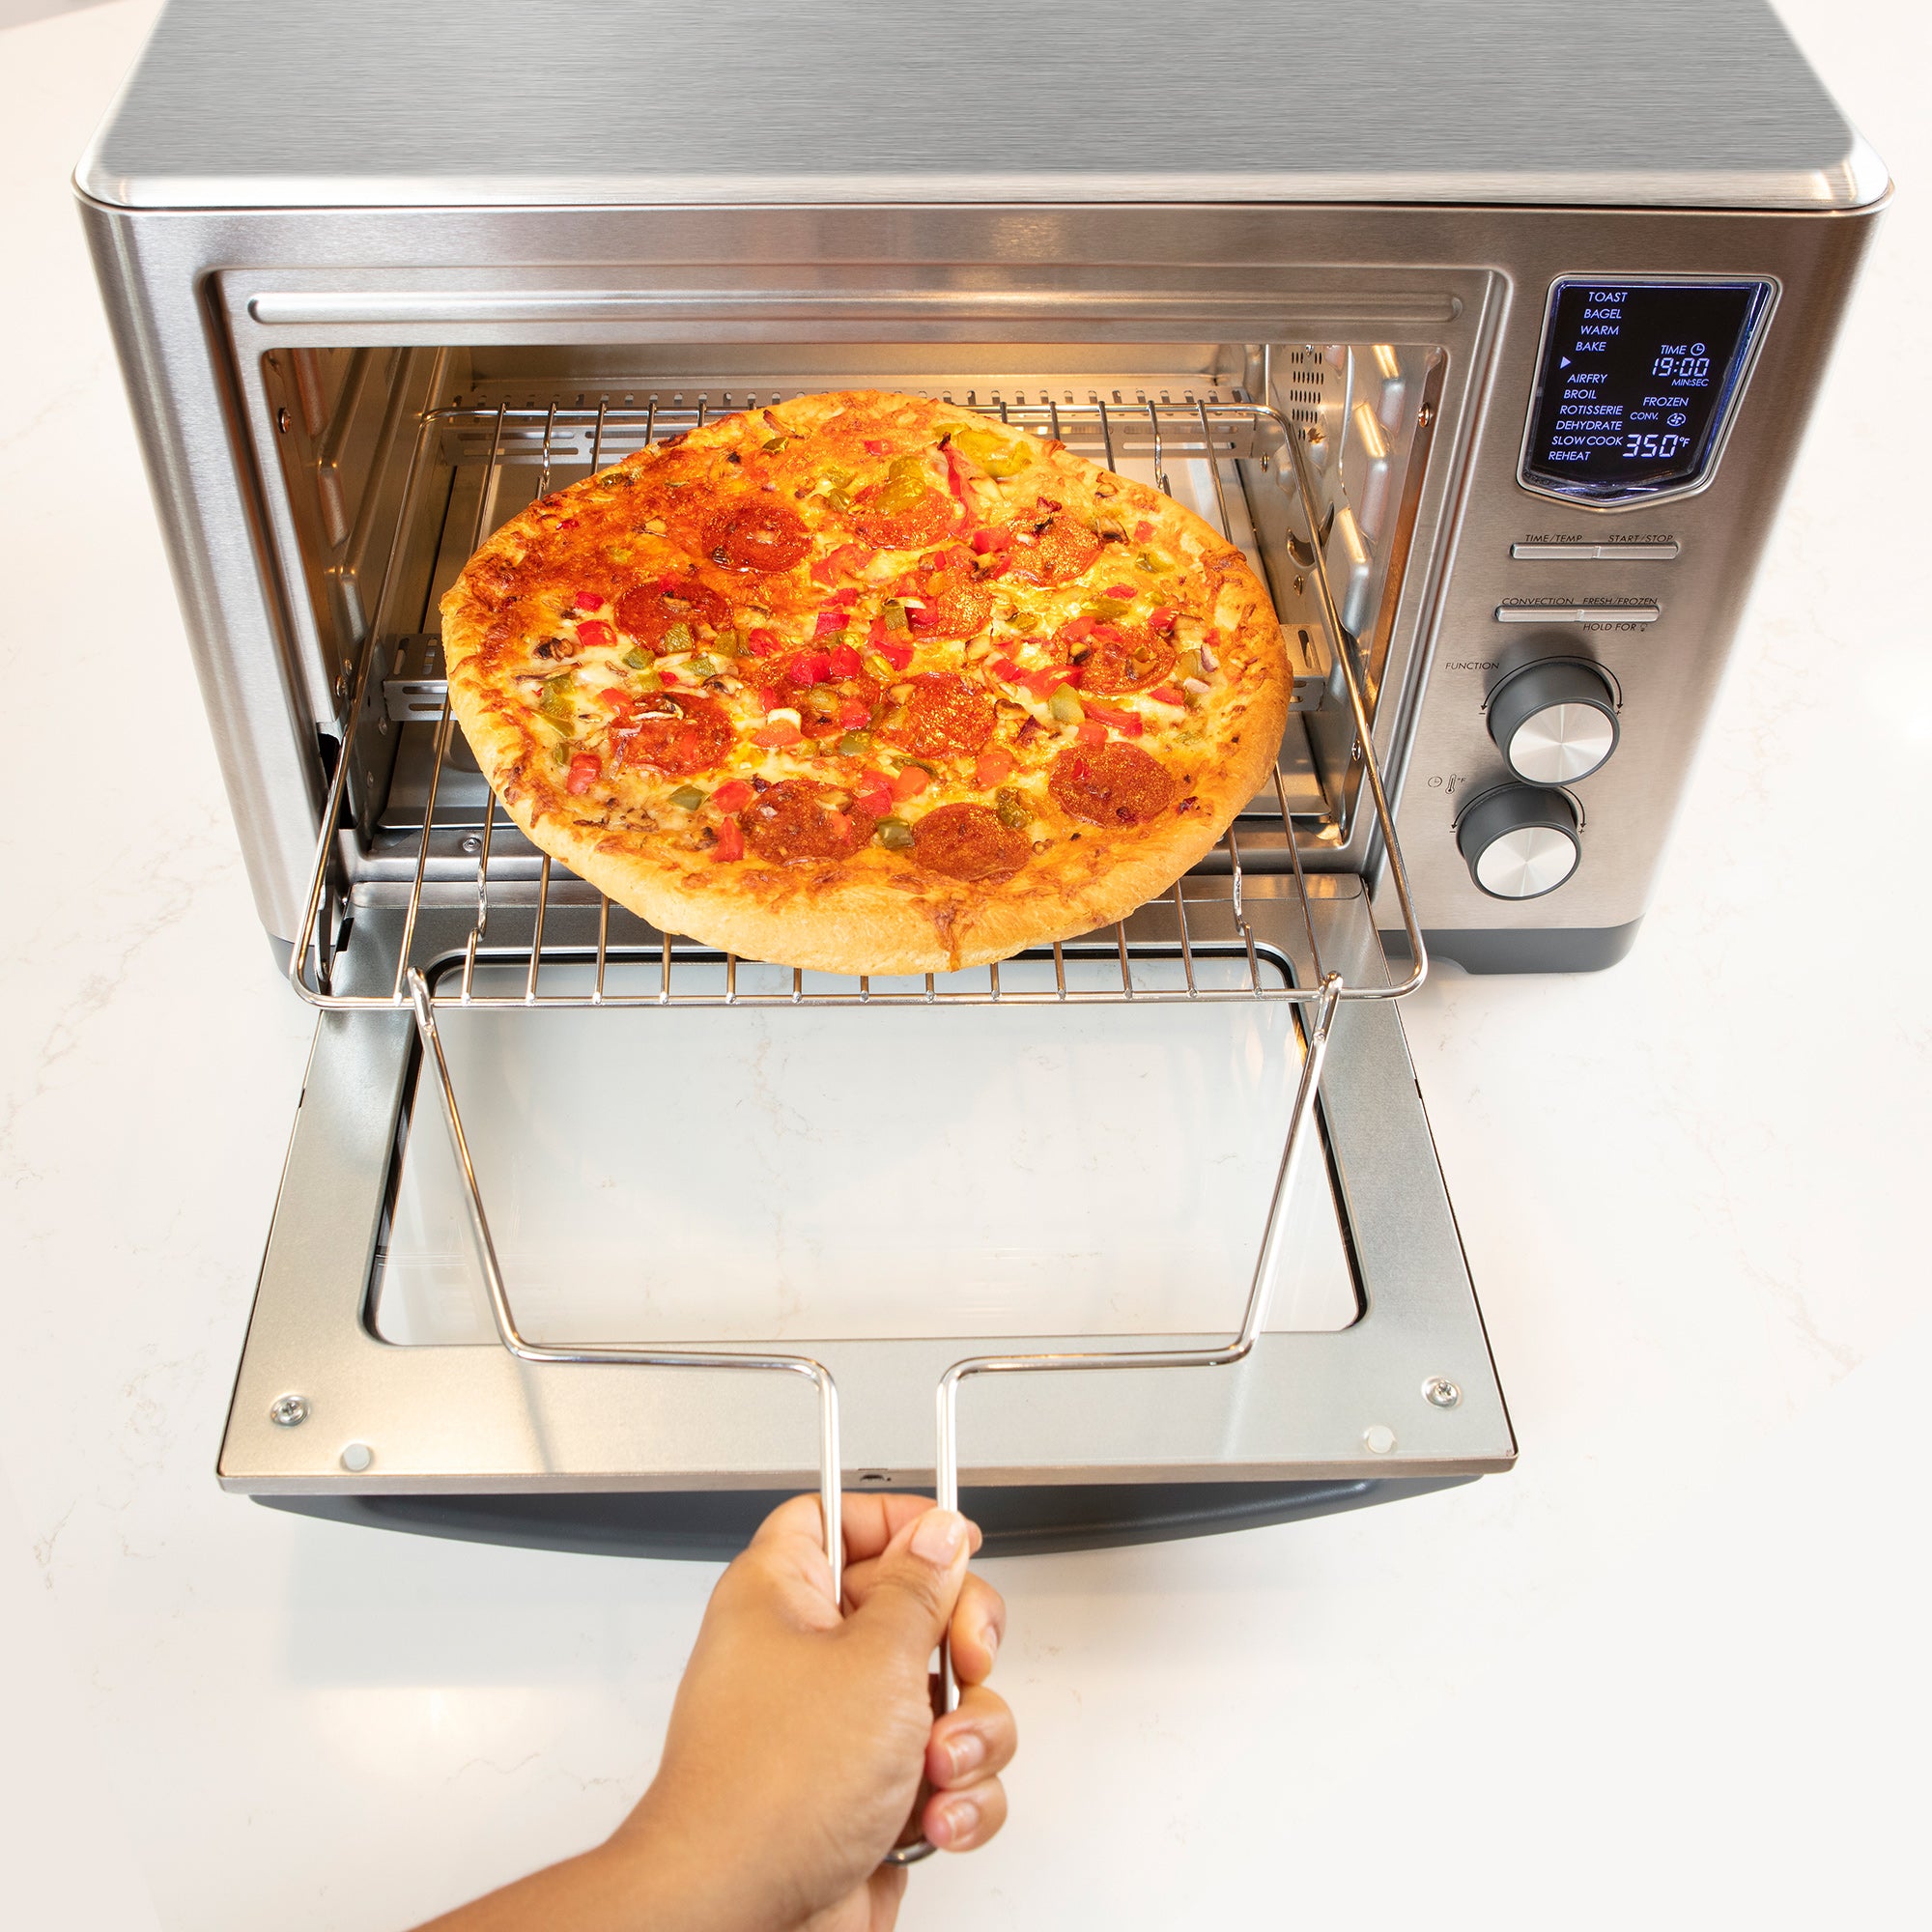 A person's hand using the rotisserie/rack handle to pull out the wire rack to check on a small pizza